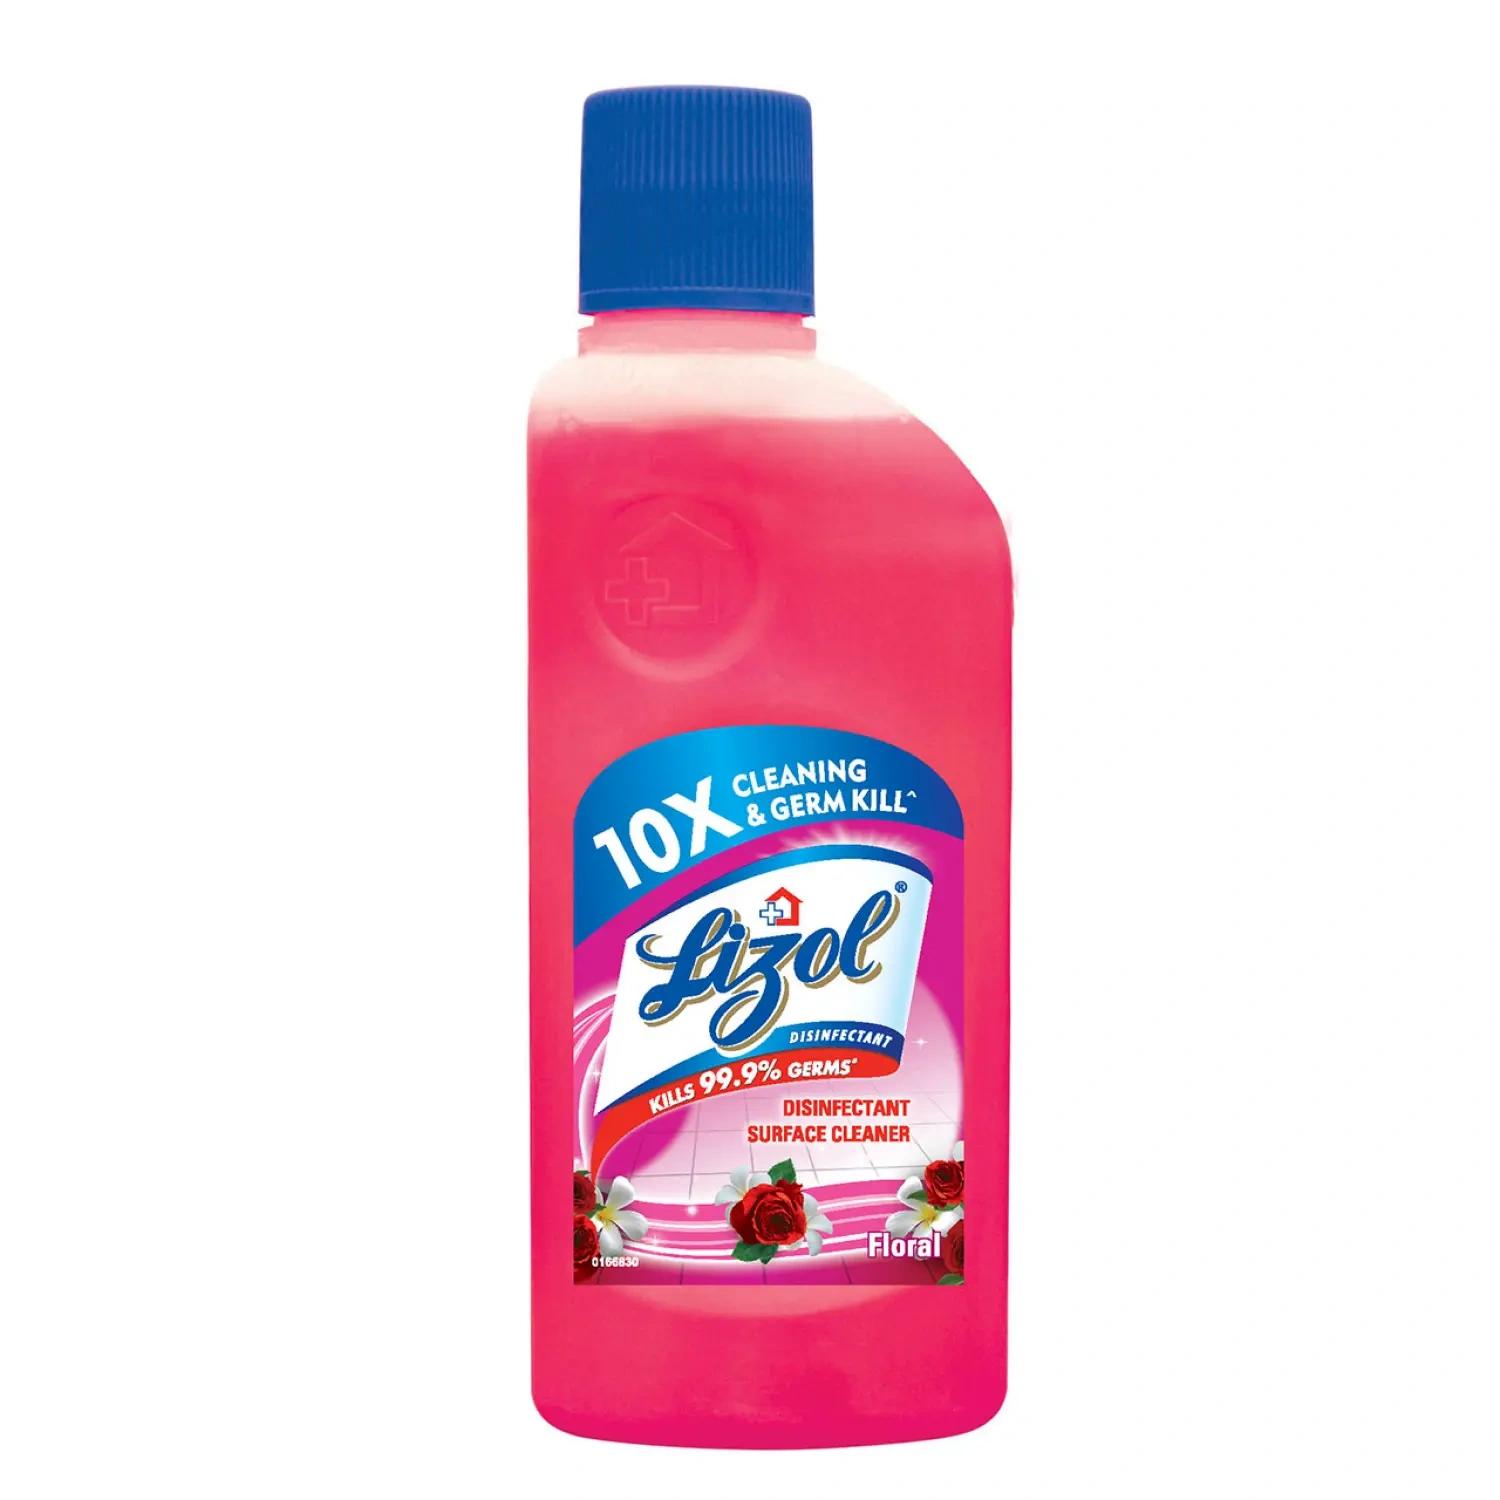 Lizol Disinfectant Surface Cleaner Floral-Lizol-1117-200ml